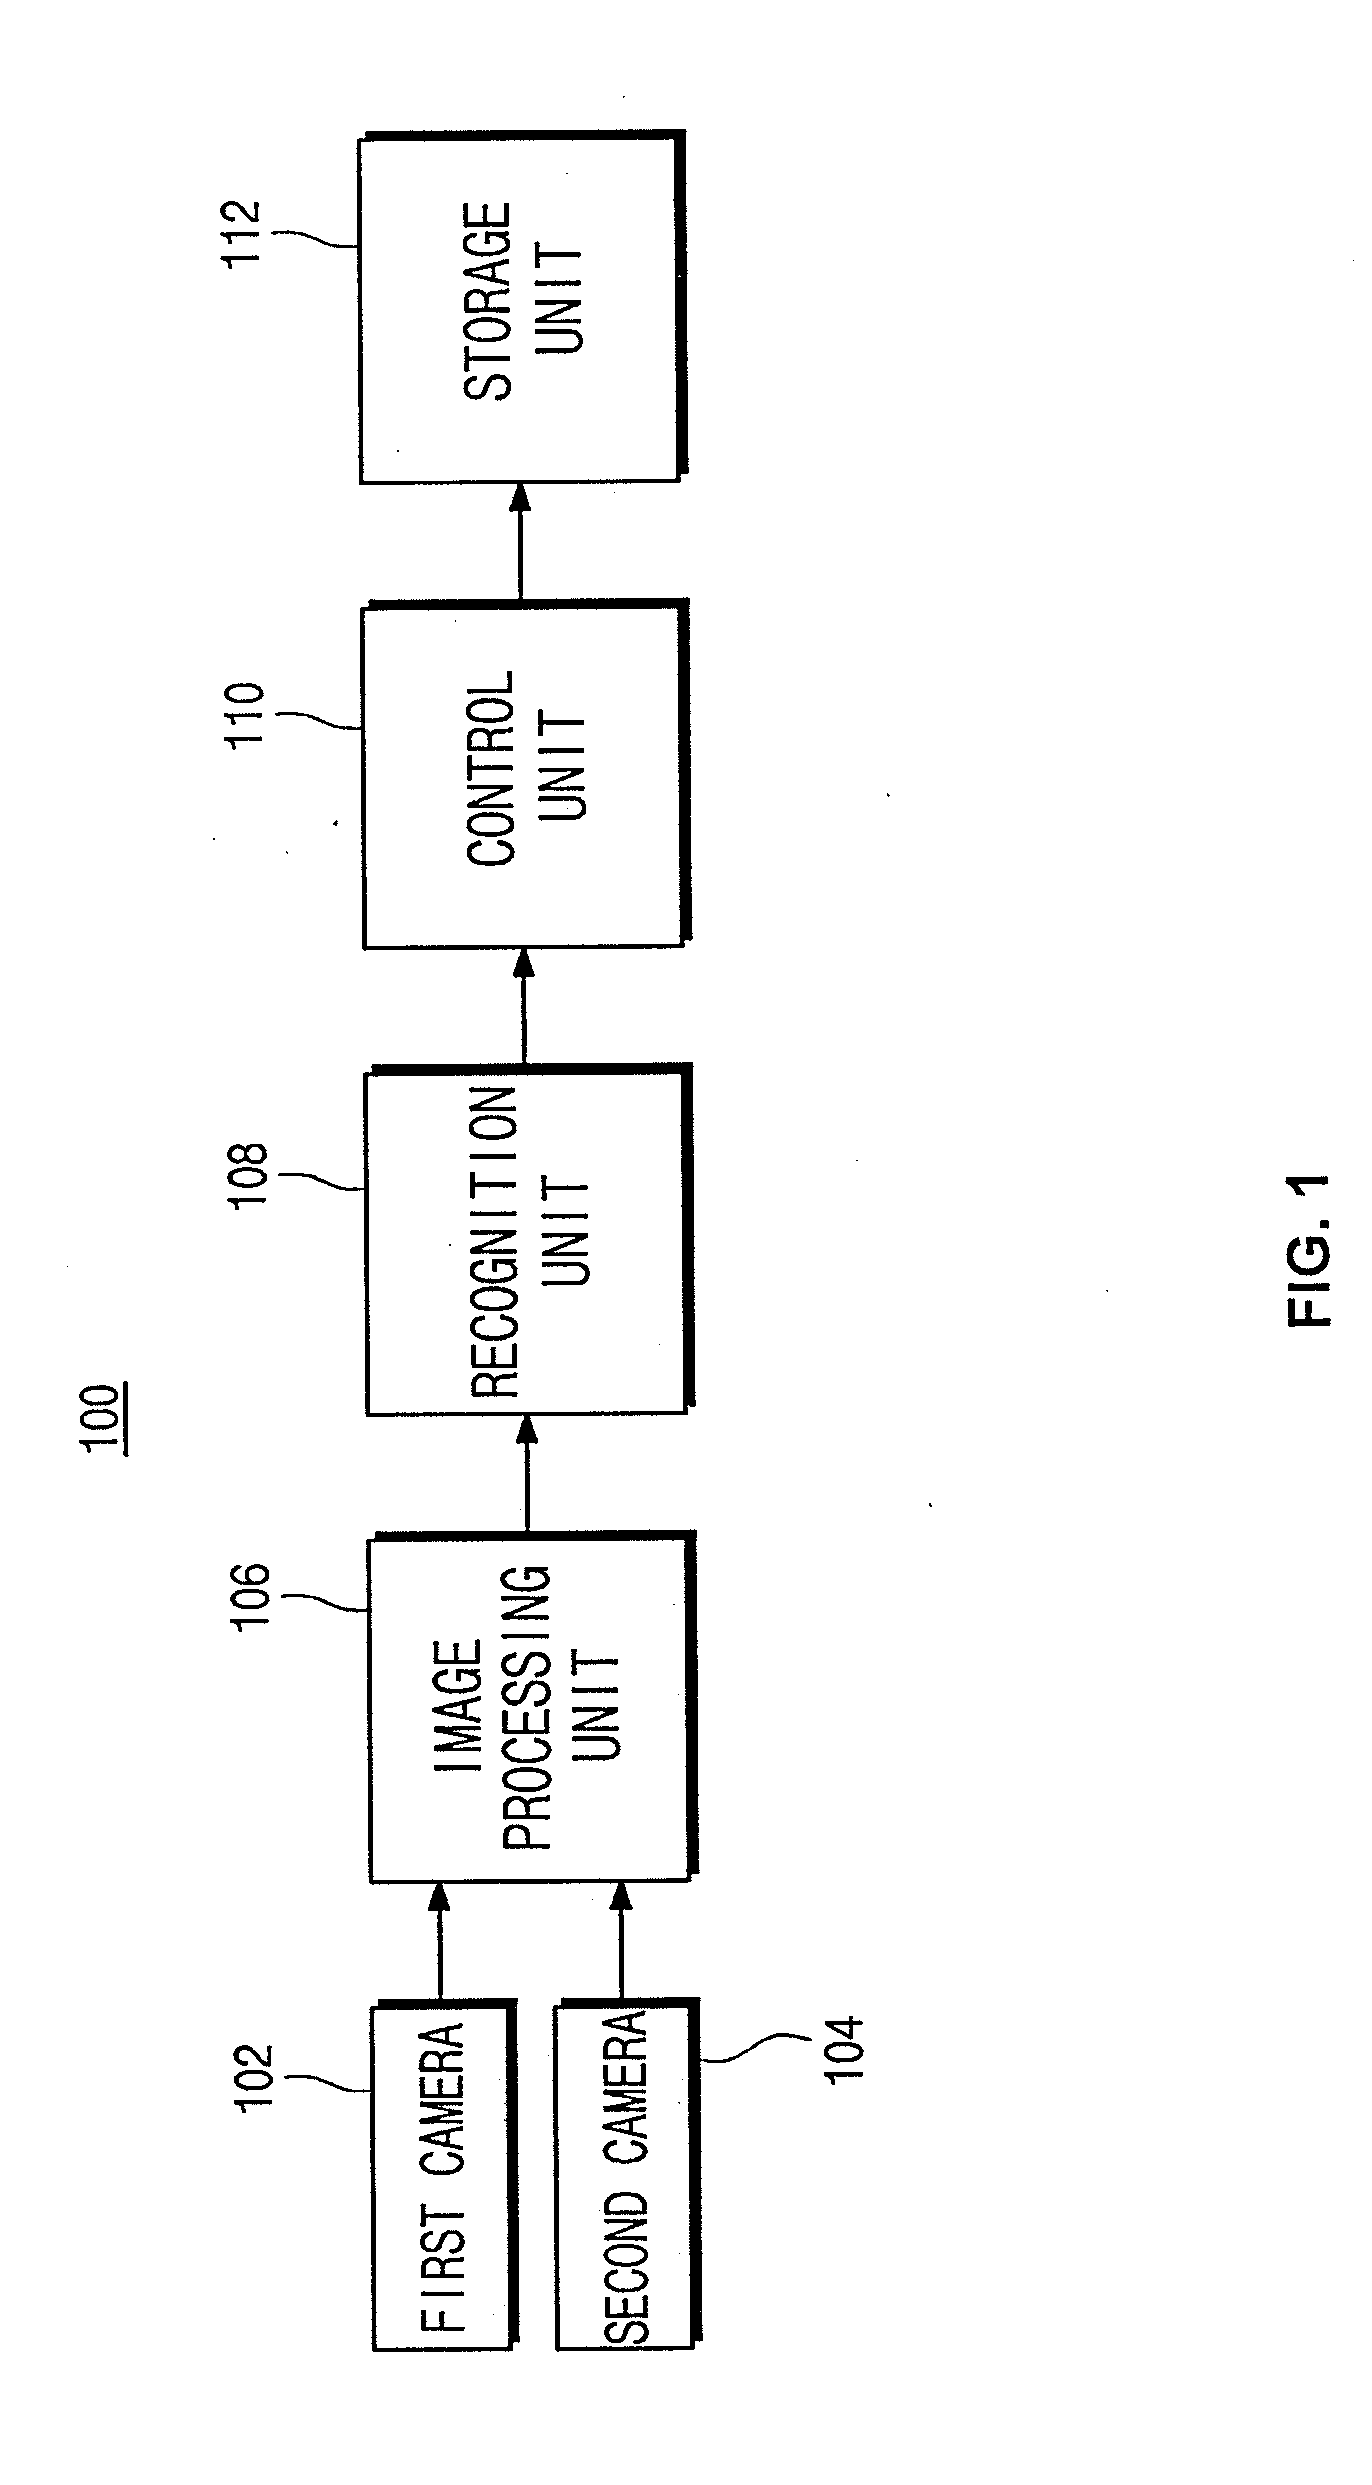 Vehicle safety control apparatus and method using cameras